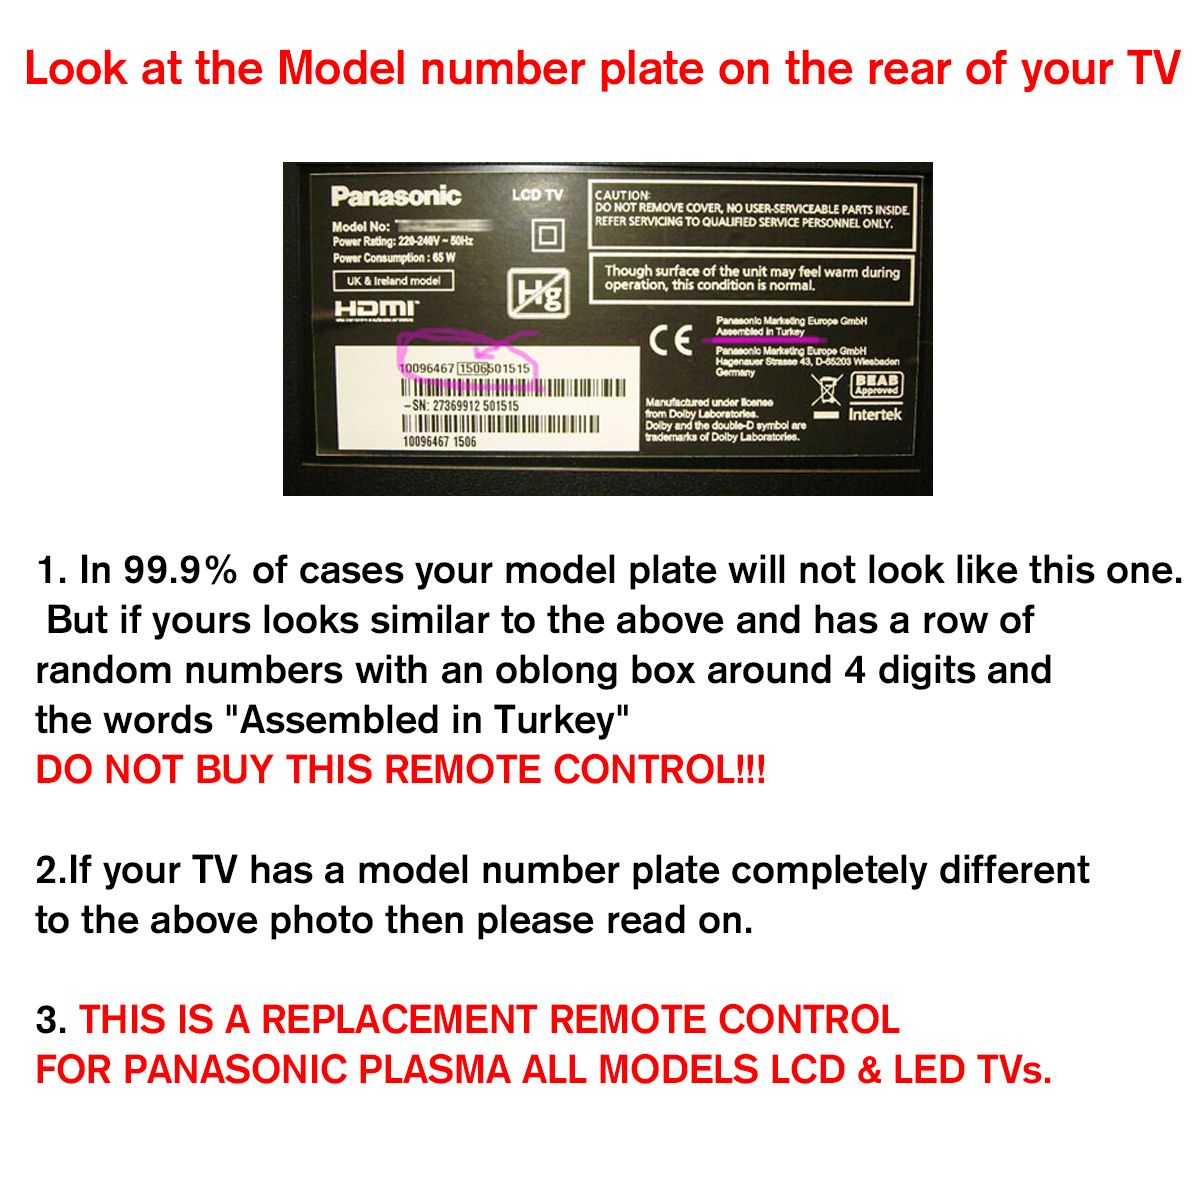 Universal-Replacement-Remote-Control-for-Panasonic-All-Models-TV-Remote-Control-1688867